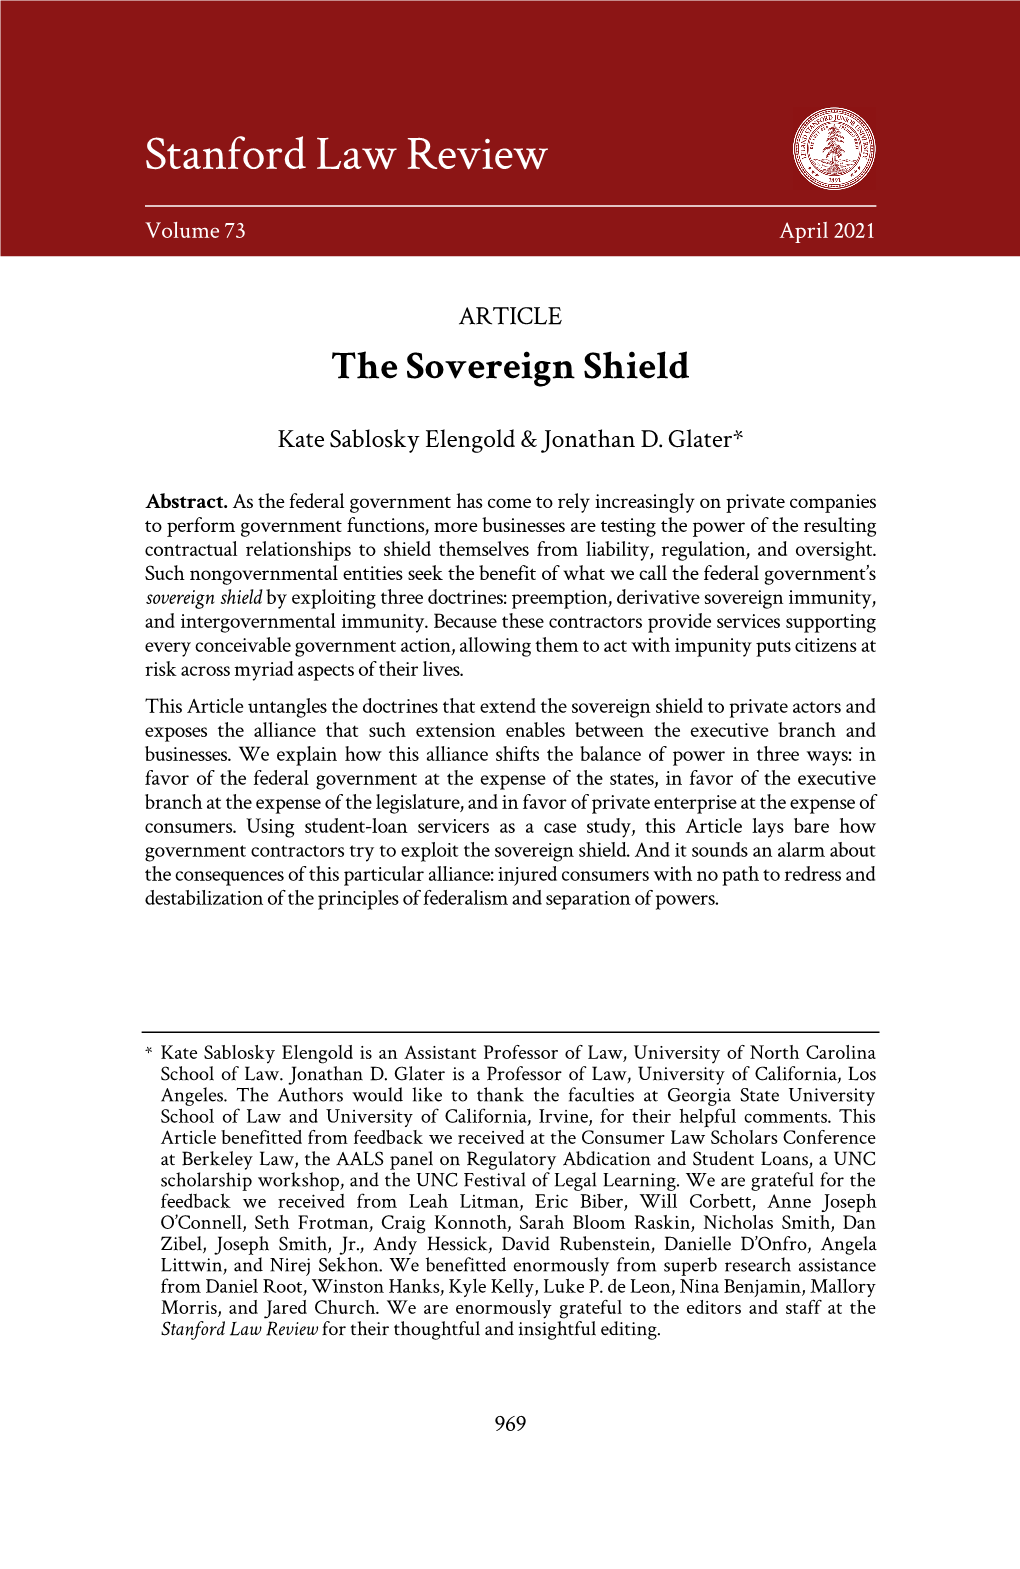 The Sovereign Shield